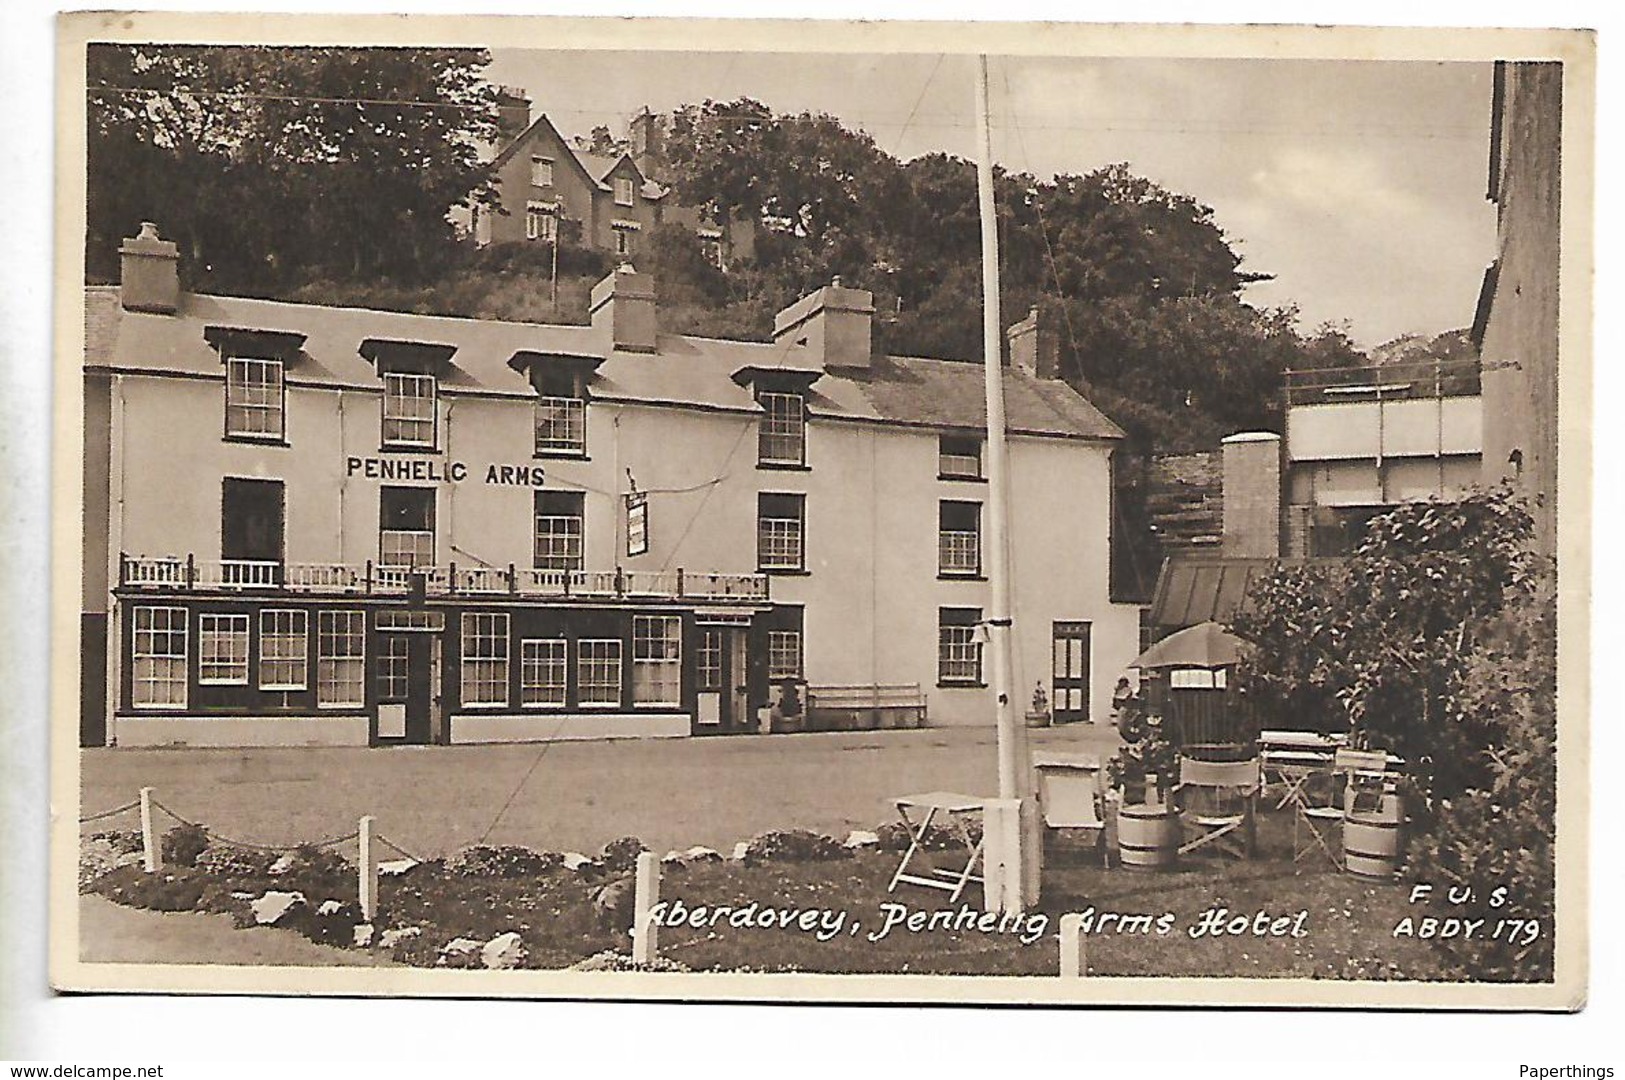 Frith Postcard, Gwynedd, Aberdovey Penhelig Arms Hotel. Landscape, Building. 1952. - Anglesey